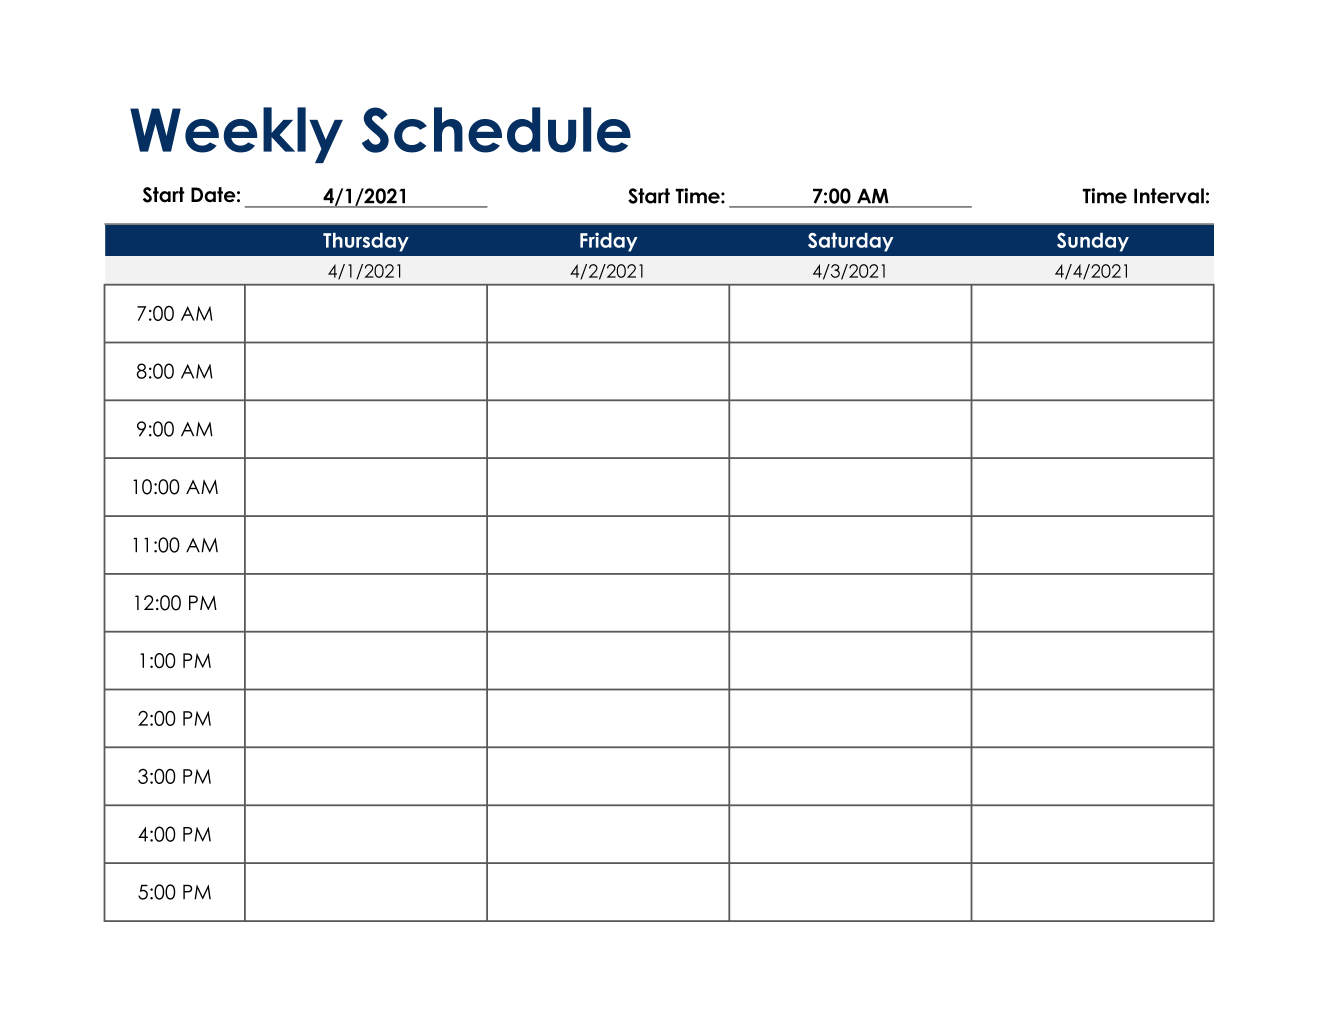 Example of a weekly schedule template with time segments